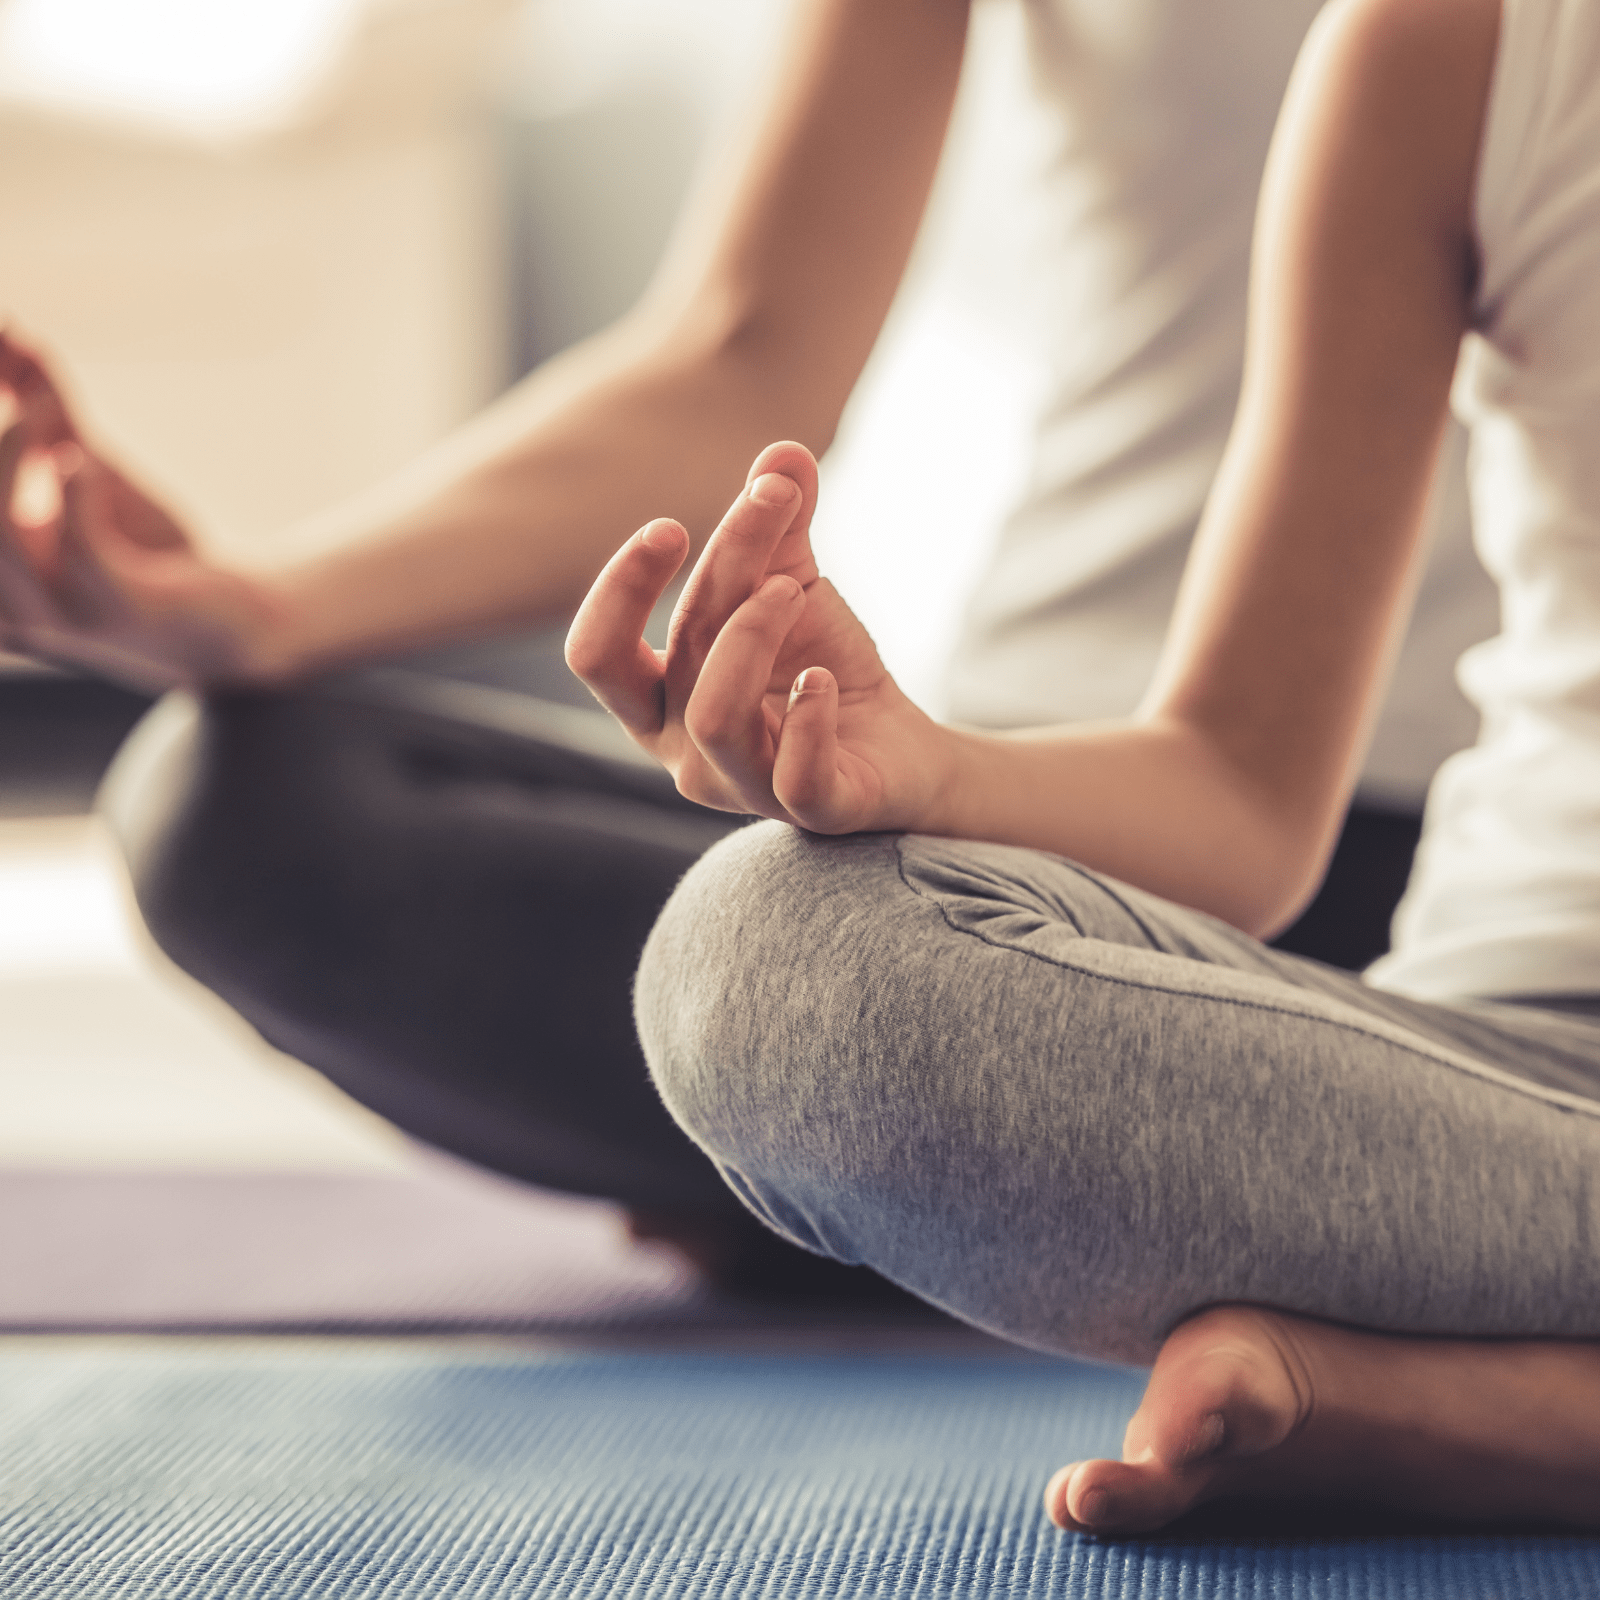 holistic trauma treatment for eating disorder recovery - Alsana's approach includes yoga and mindfulness